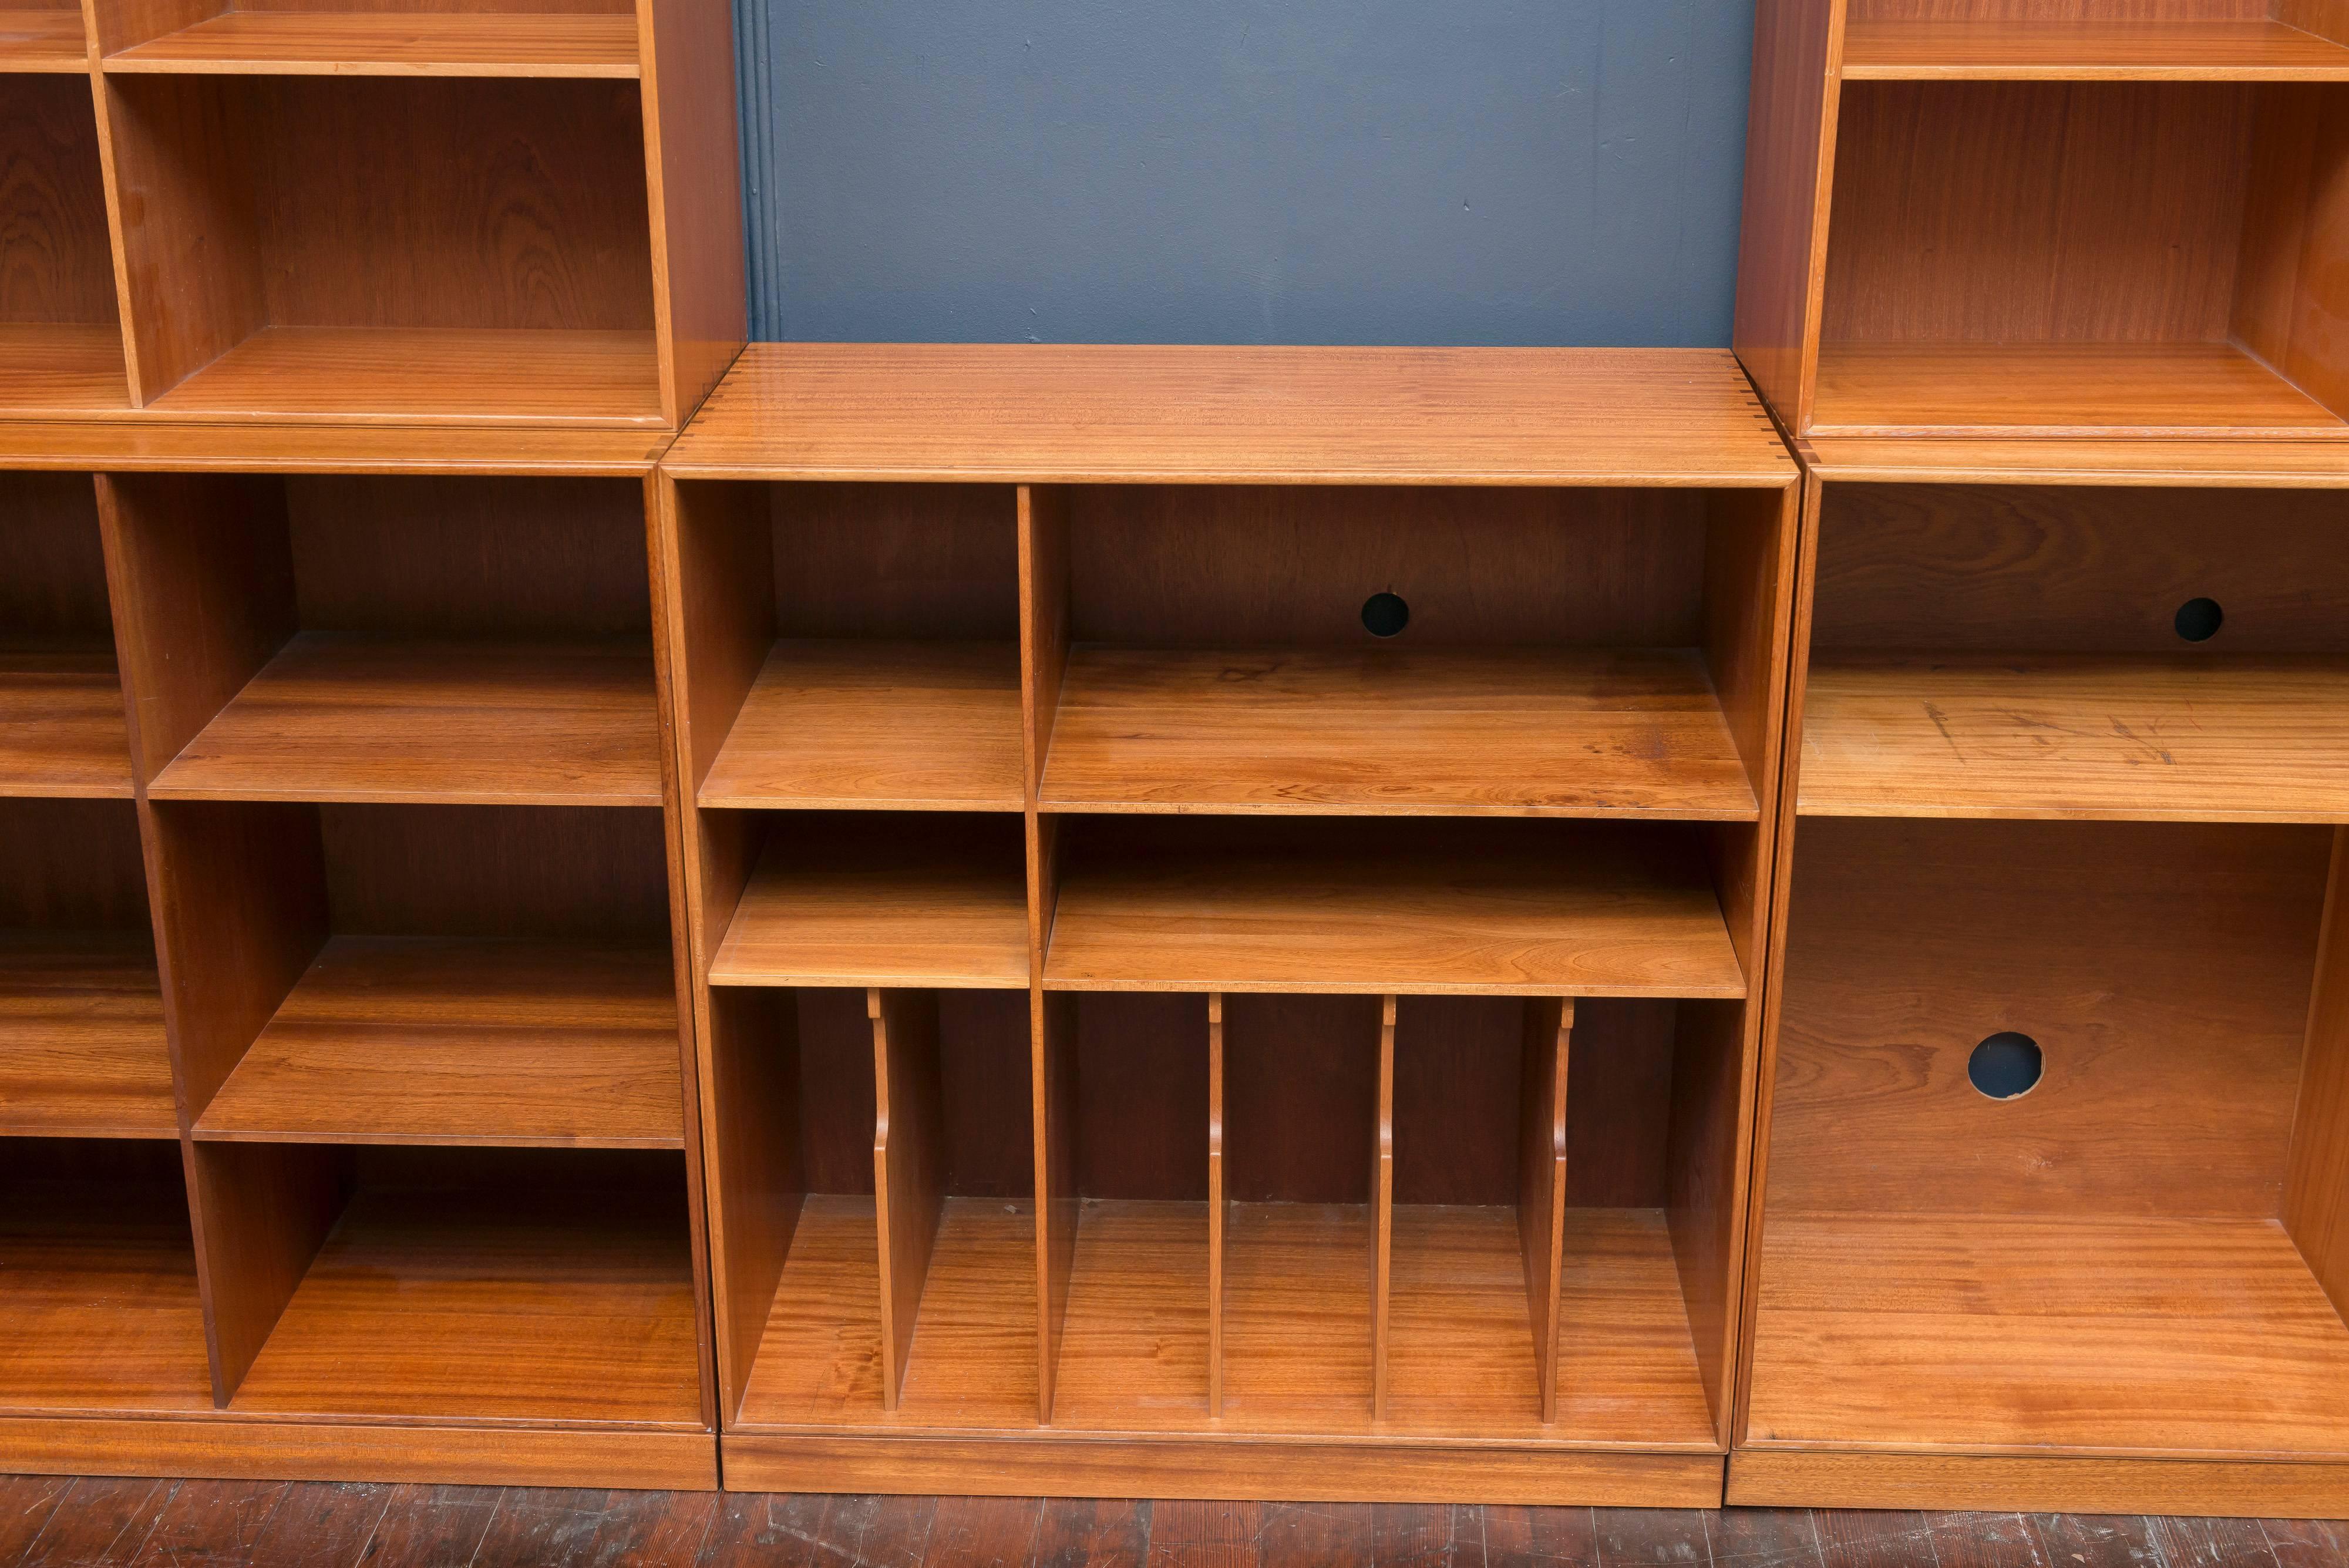 Five-piece mahogany bookcase made by Mogens Koch, Denmark. Originally used as a Hi-Fi unit with electrical access for components, perfect for a living room or office. Made by Rud Rasmussen.